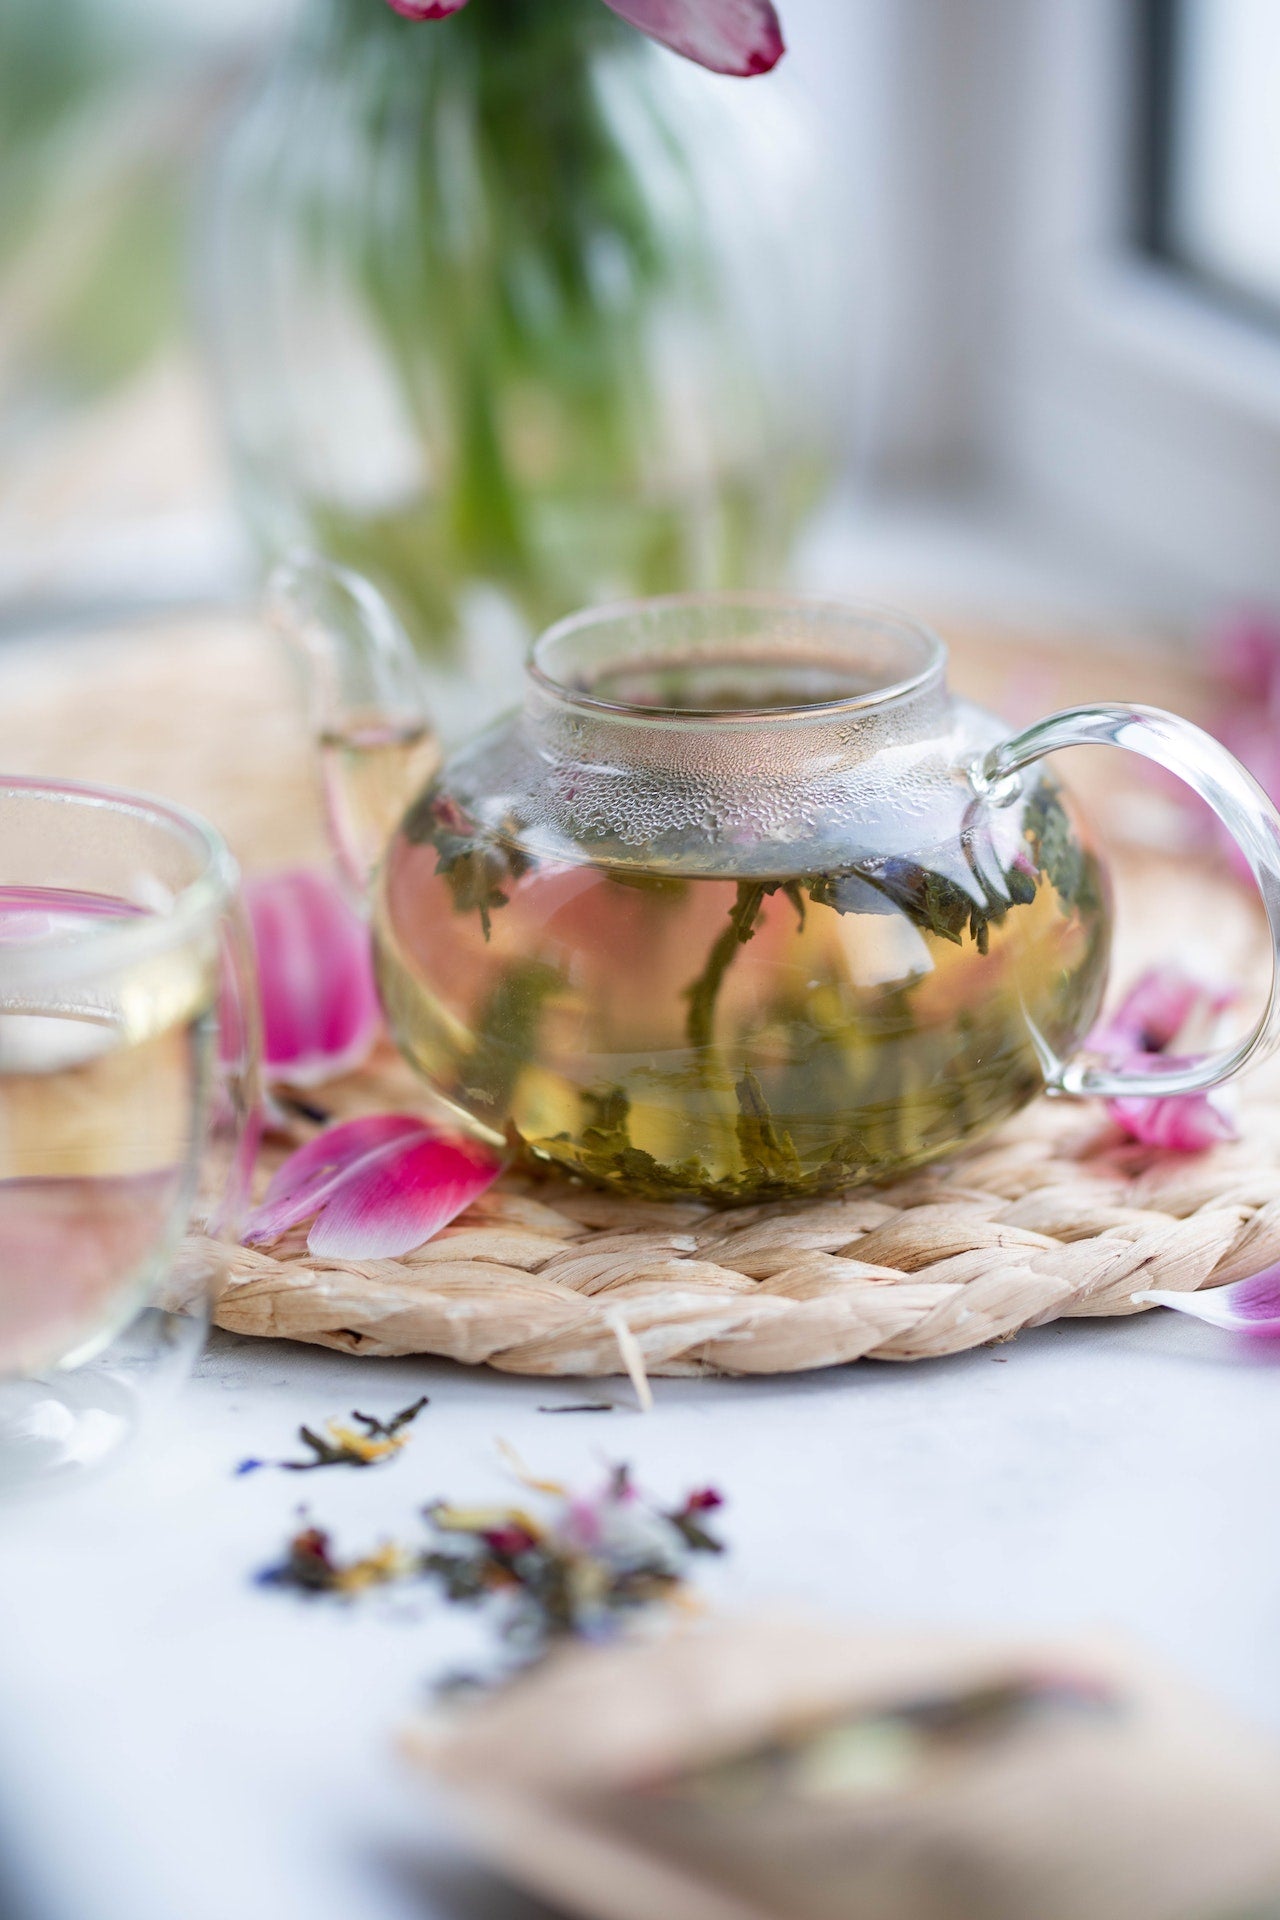 Why is Loose Leaf Tea Superior to Teabags?